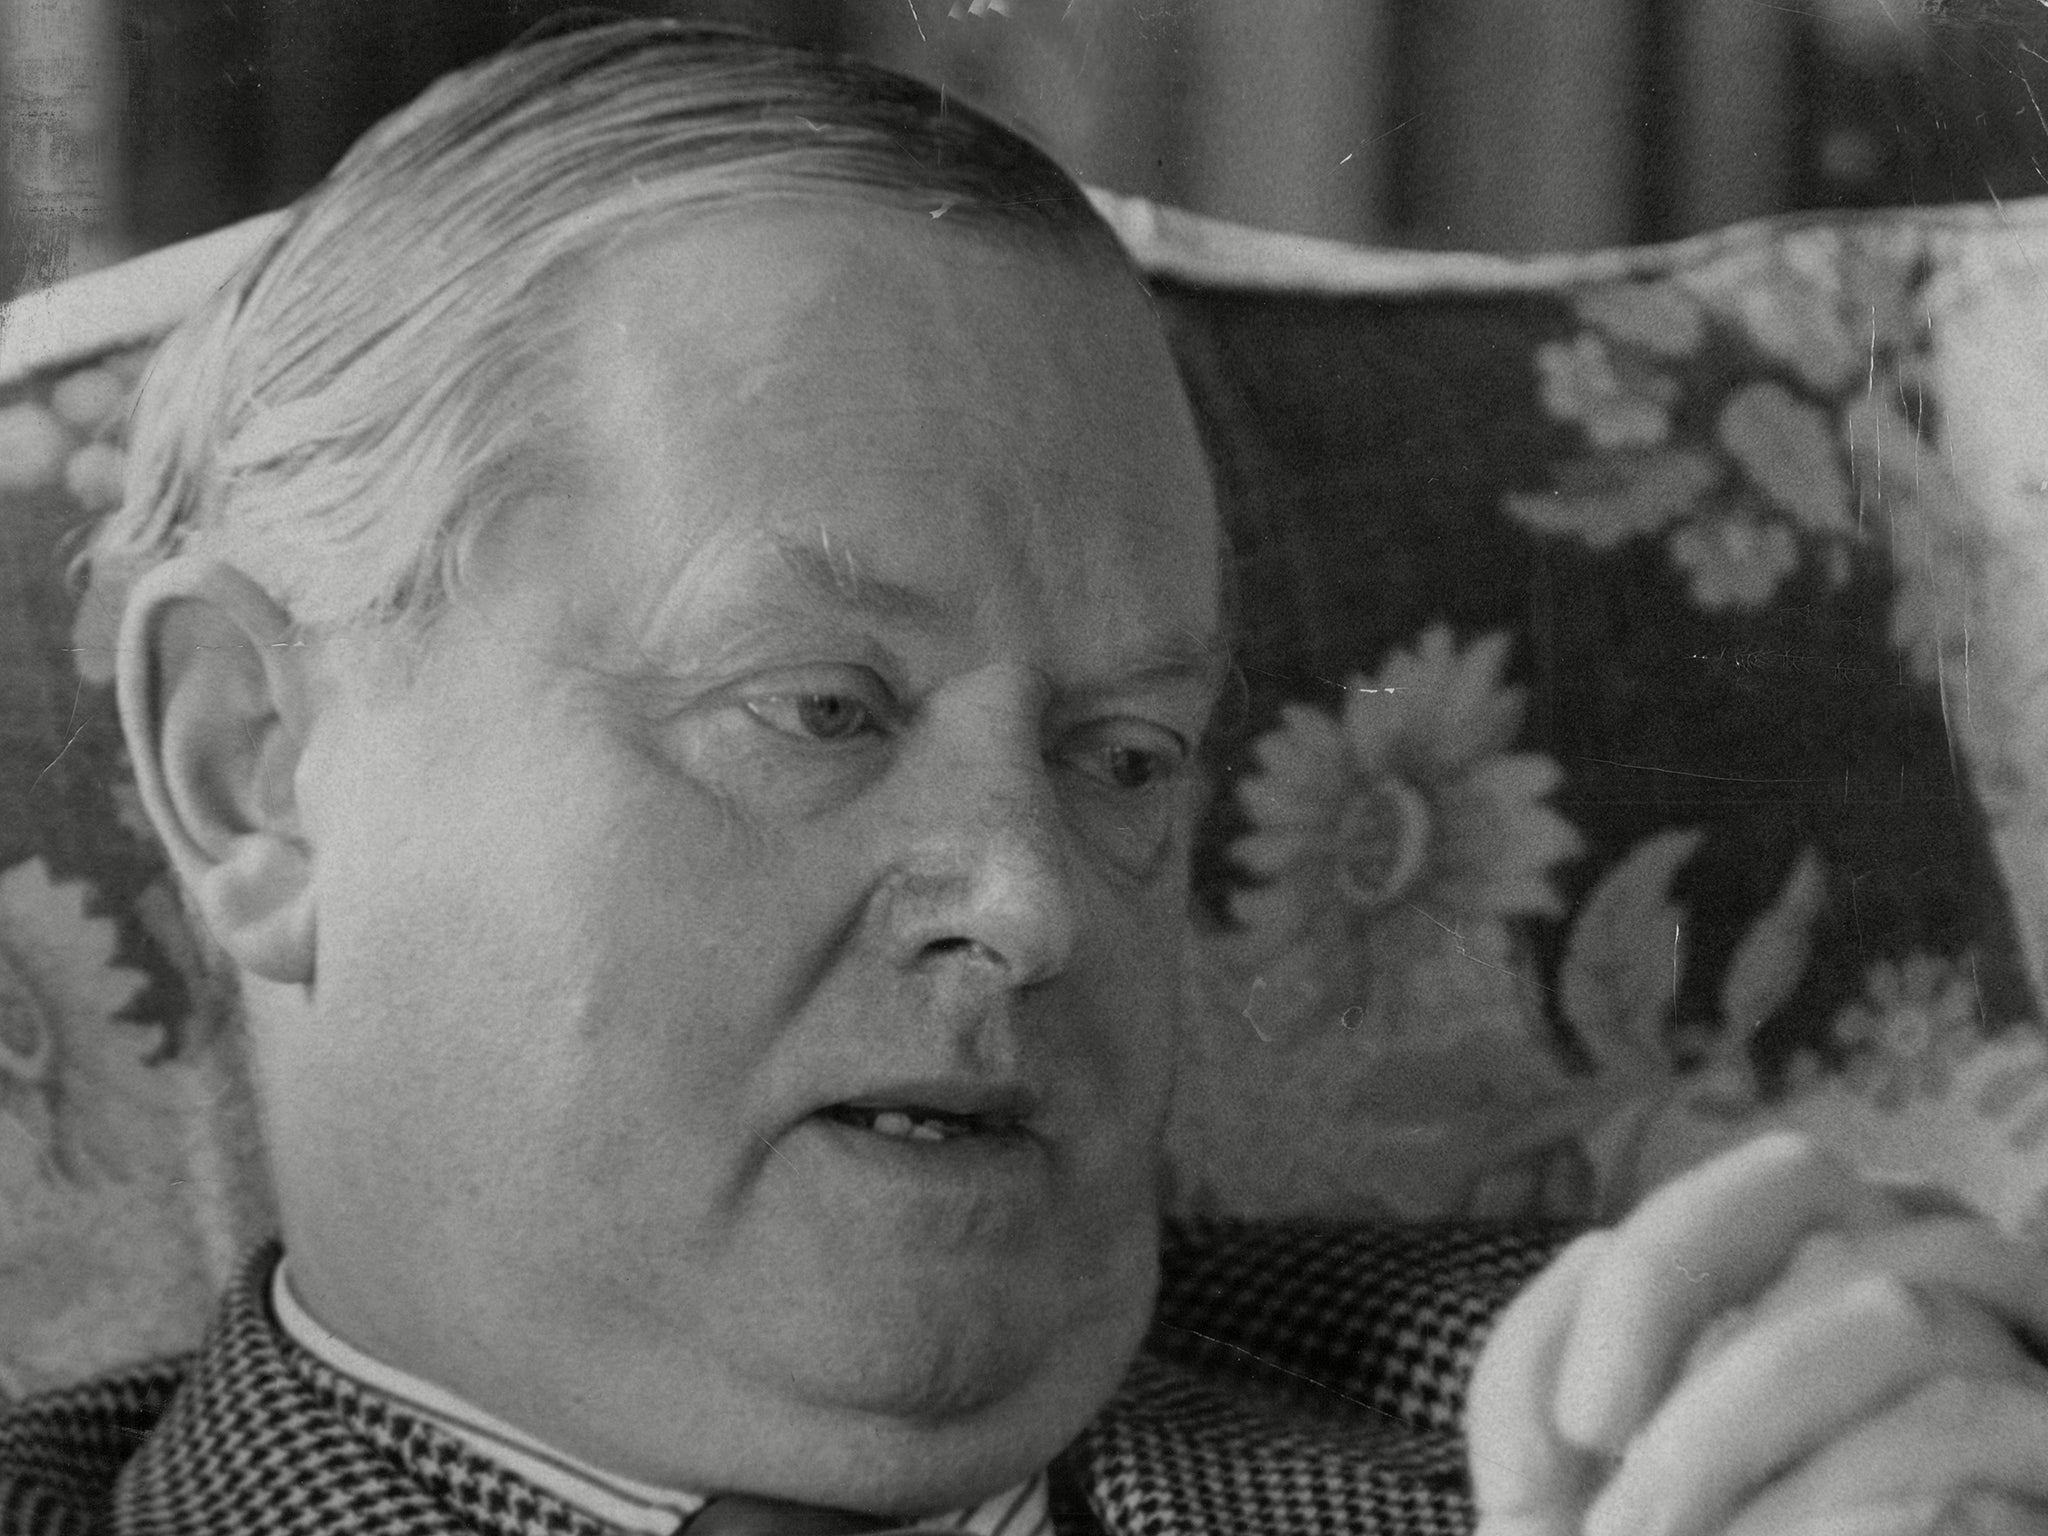 Evelyn Waugh at home in 1960